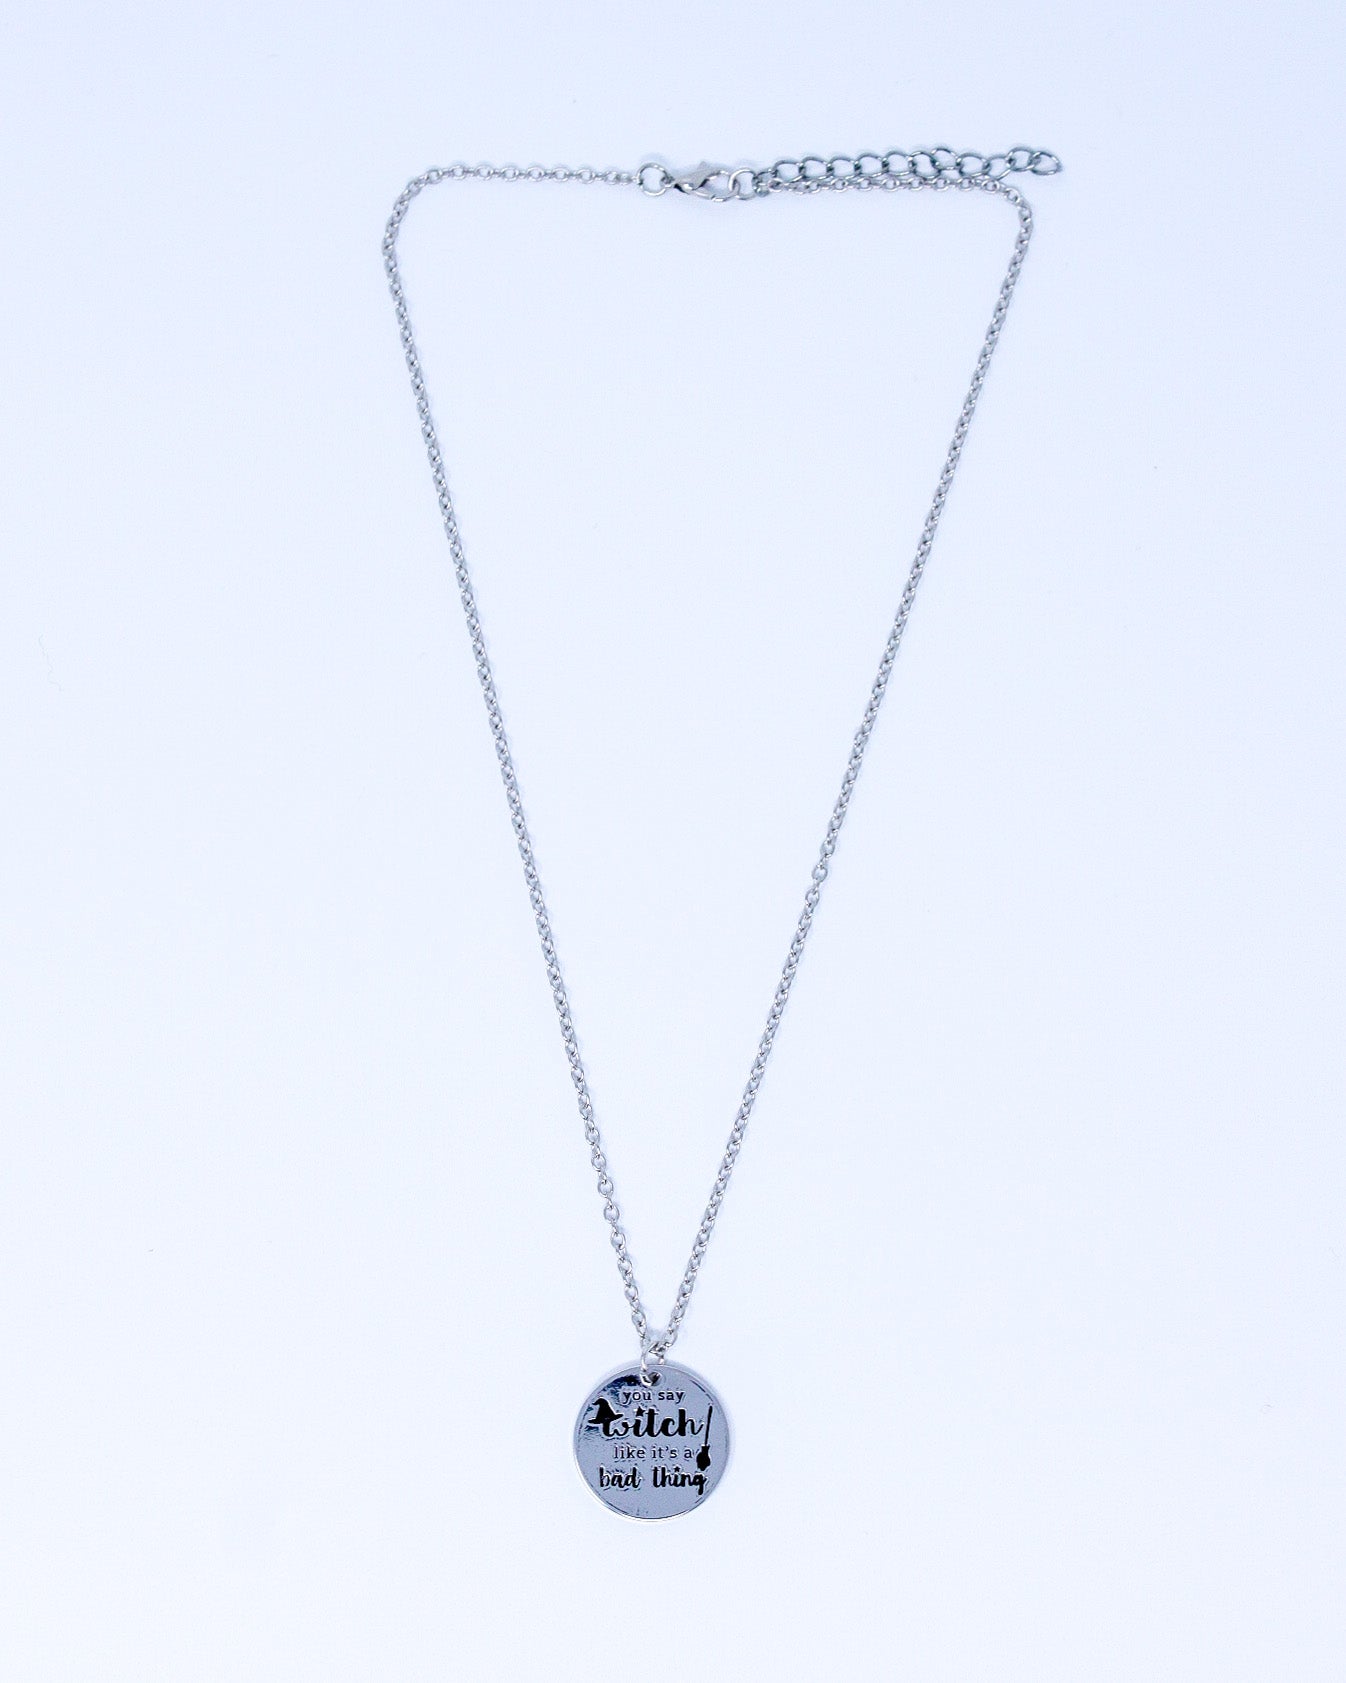 Sayings Necklace - You Say Witch